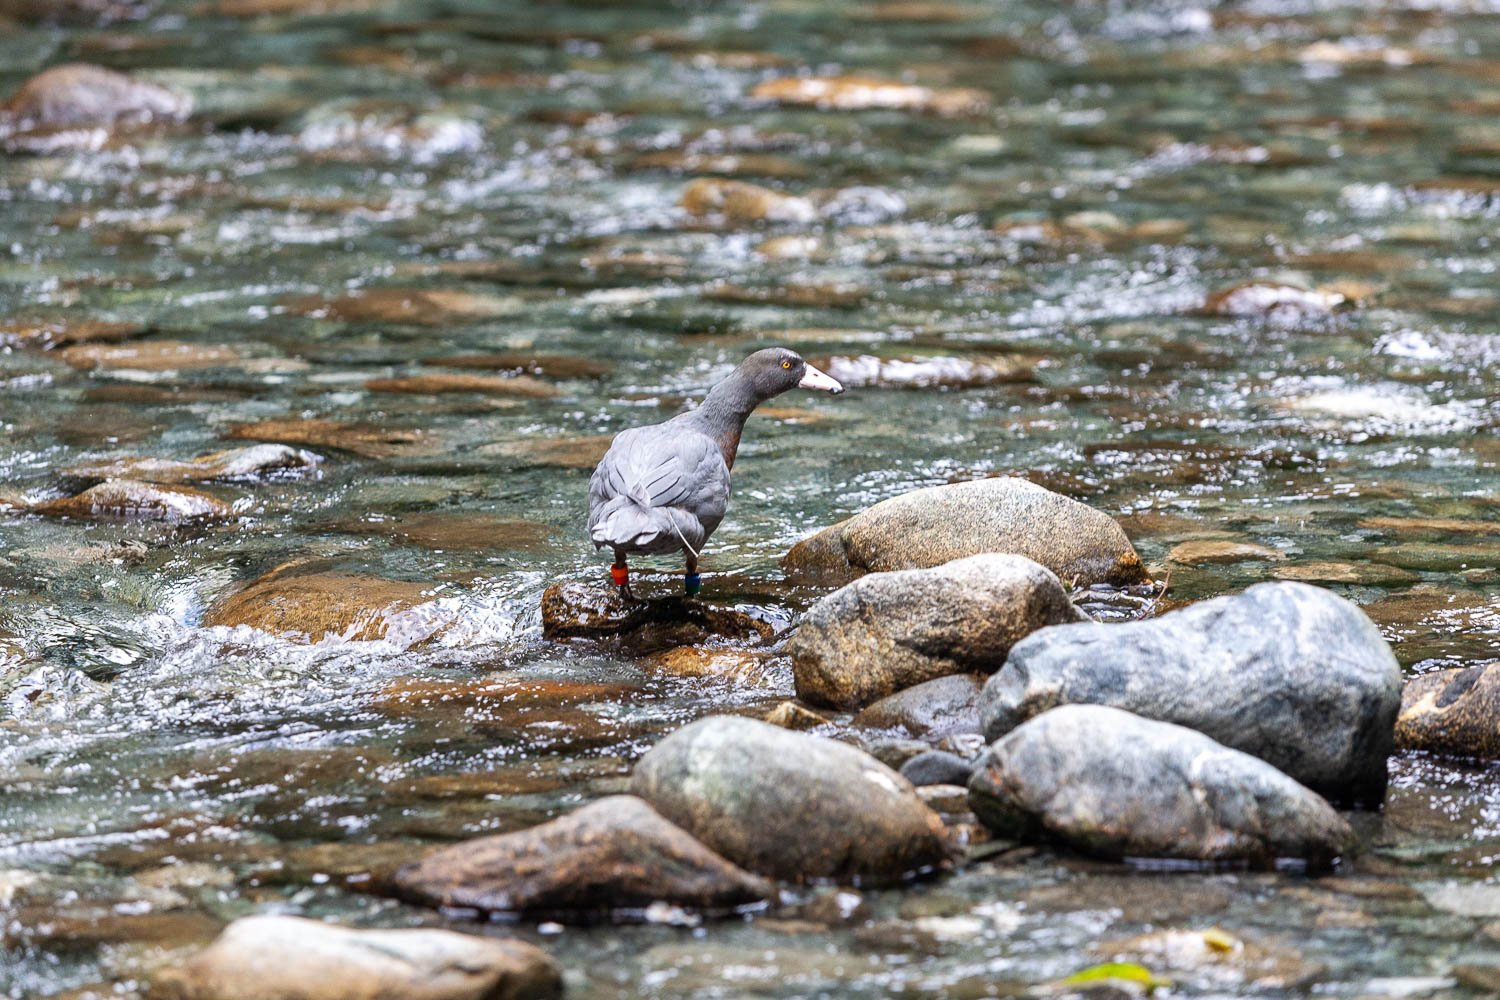 The rare blue duck/ wiho is standing in feet-water with the lake stones surrounded, Milford Track – New Zealand.